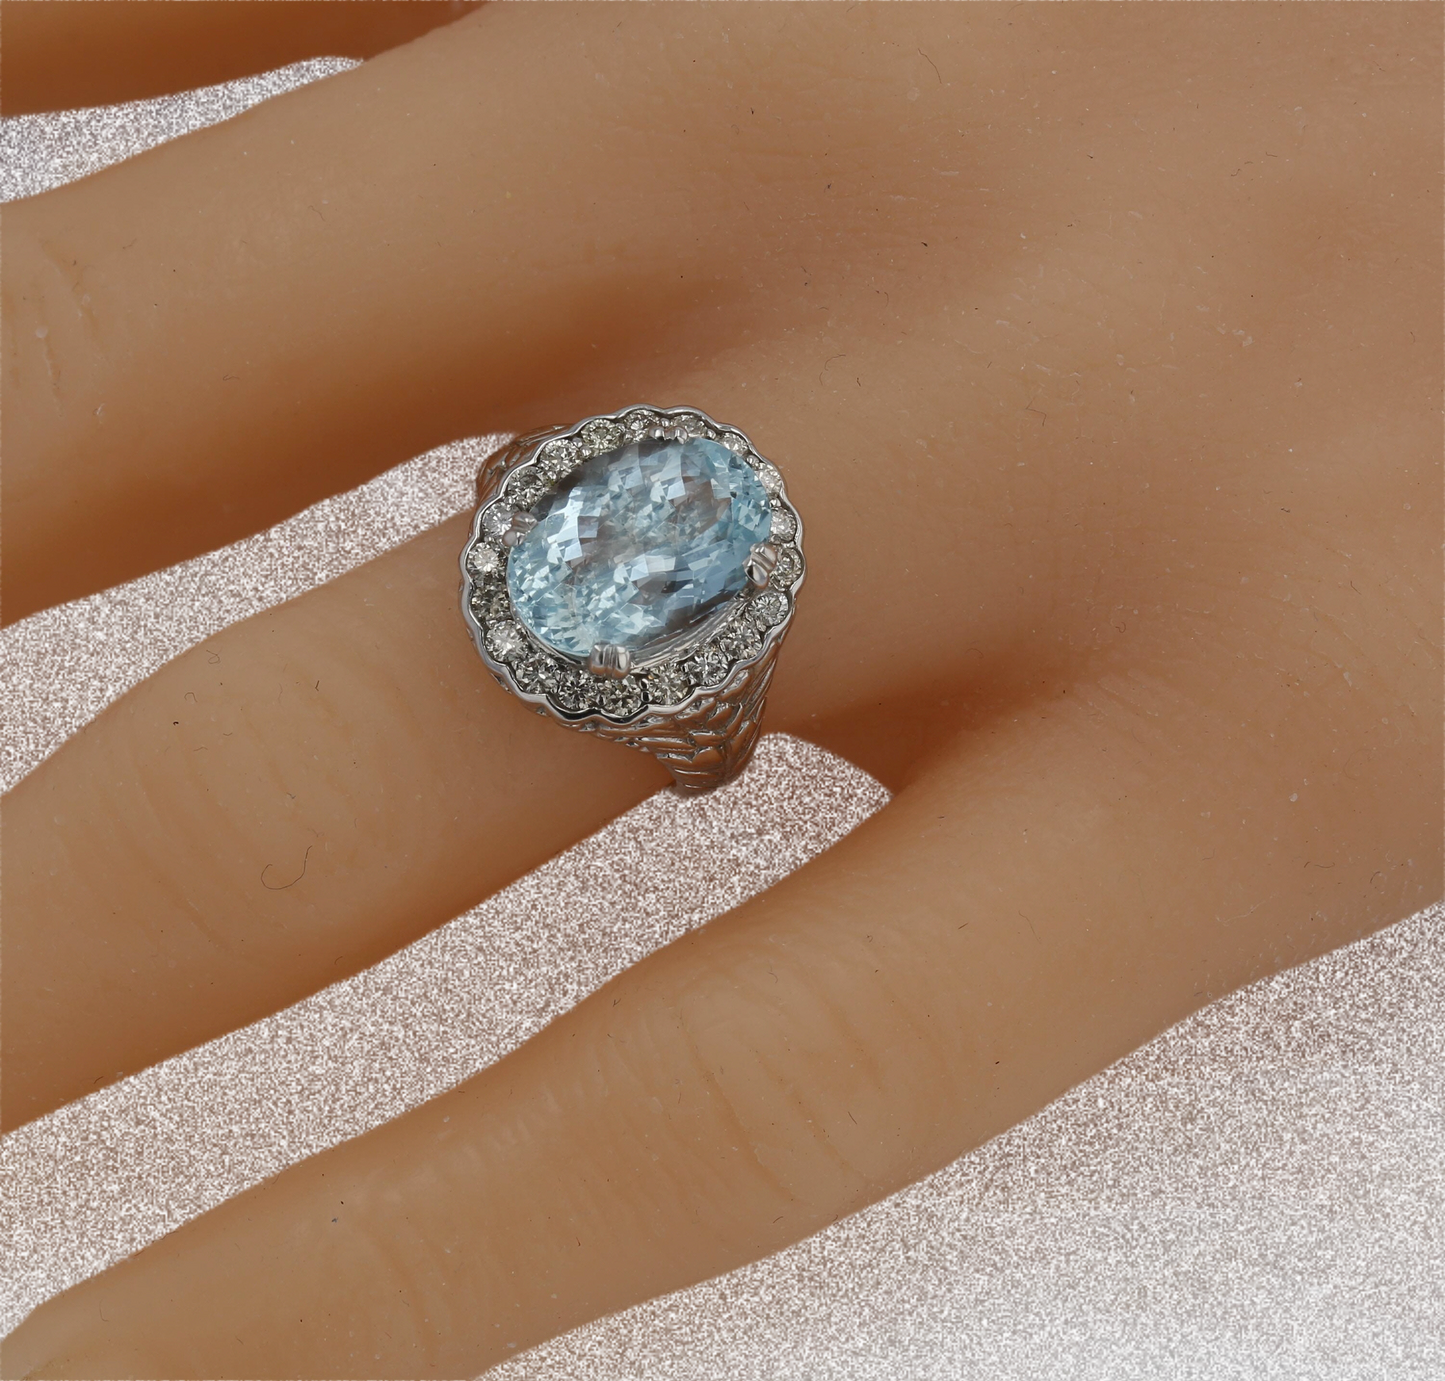 14K White gold oval floral aquamarine with diamonds ring